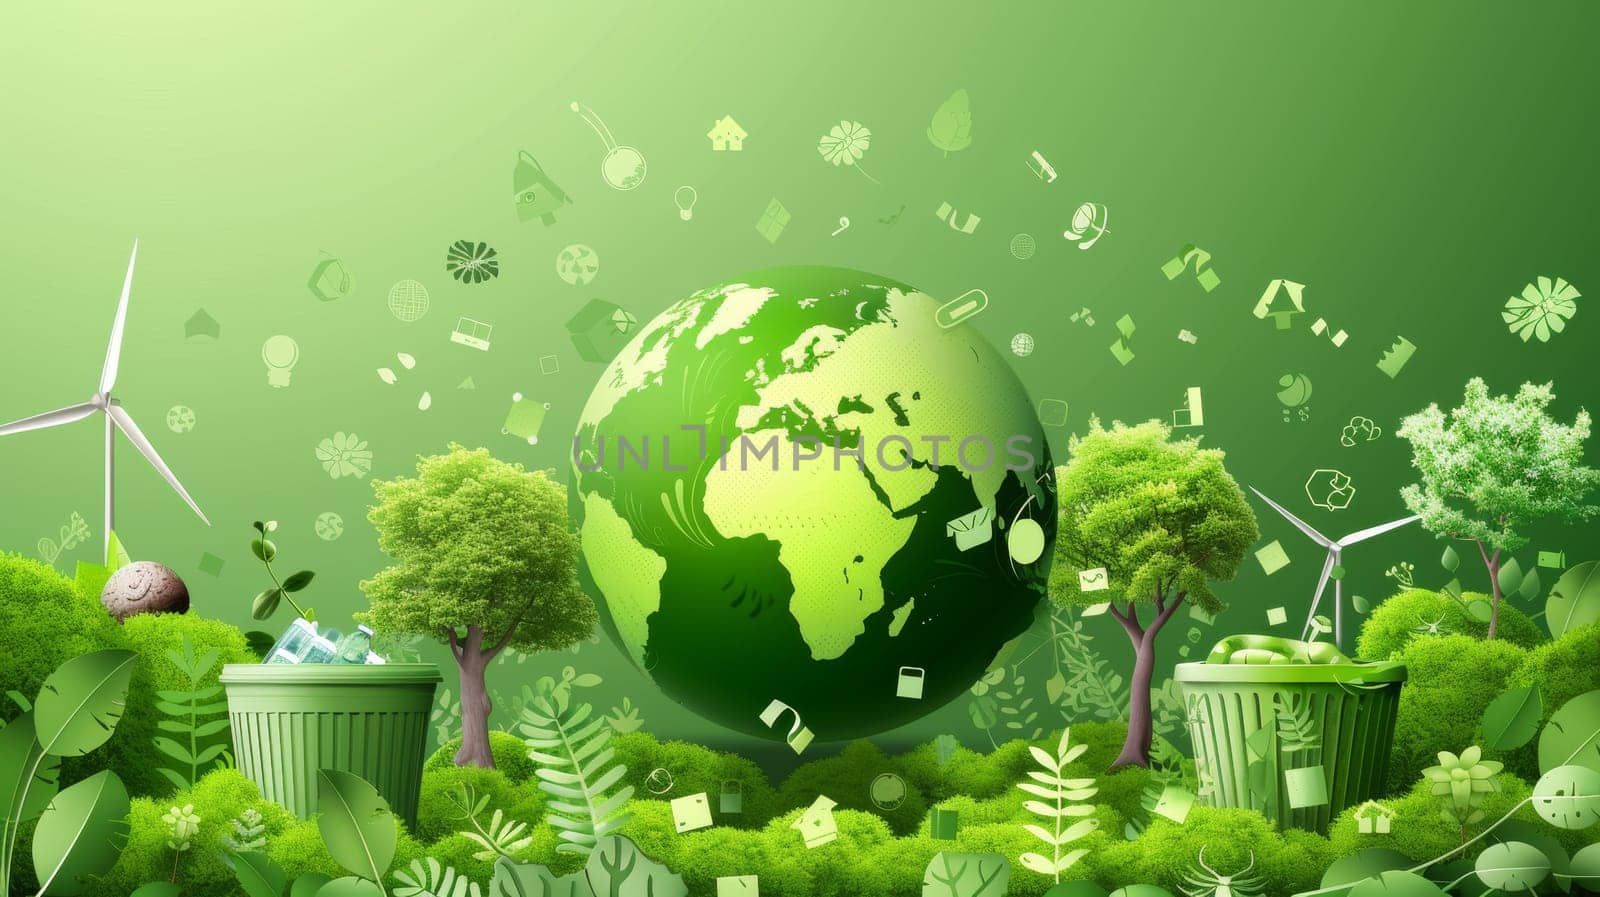 An eco-friendly illustration design for web, banner, campaign, social media posts. Save the earth, globe, recycle bin, tree, windmill are some of the elements in this design.